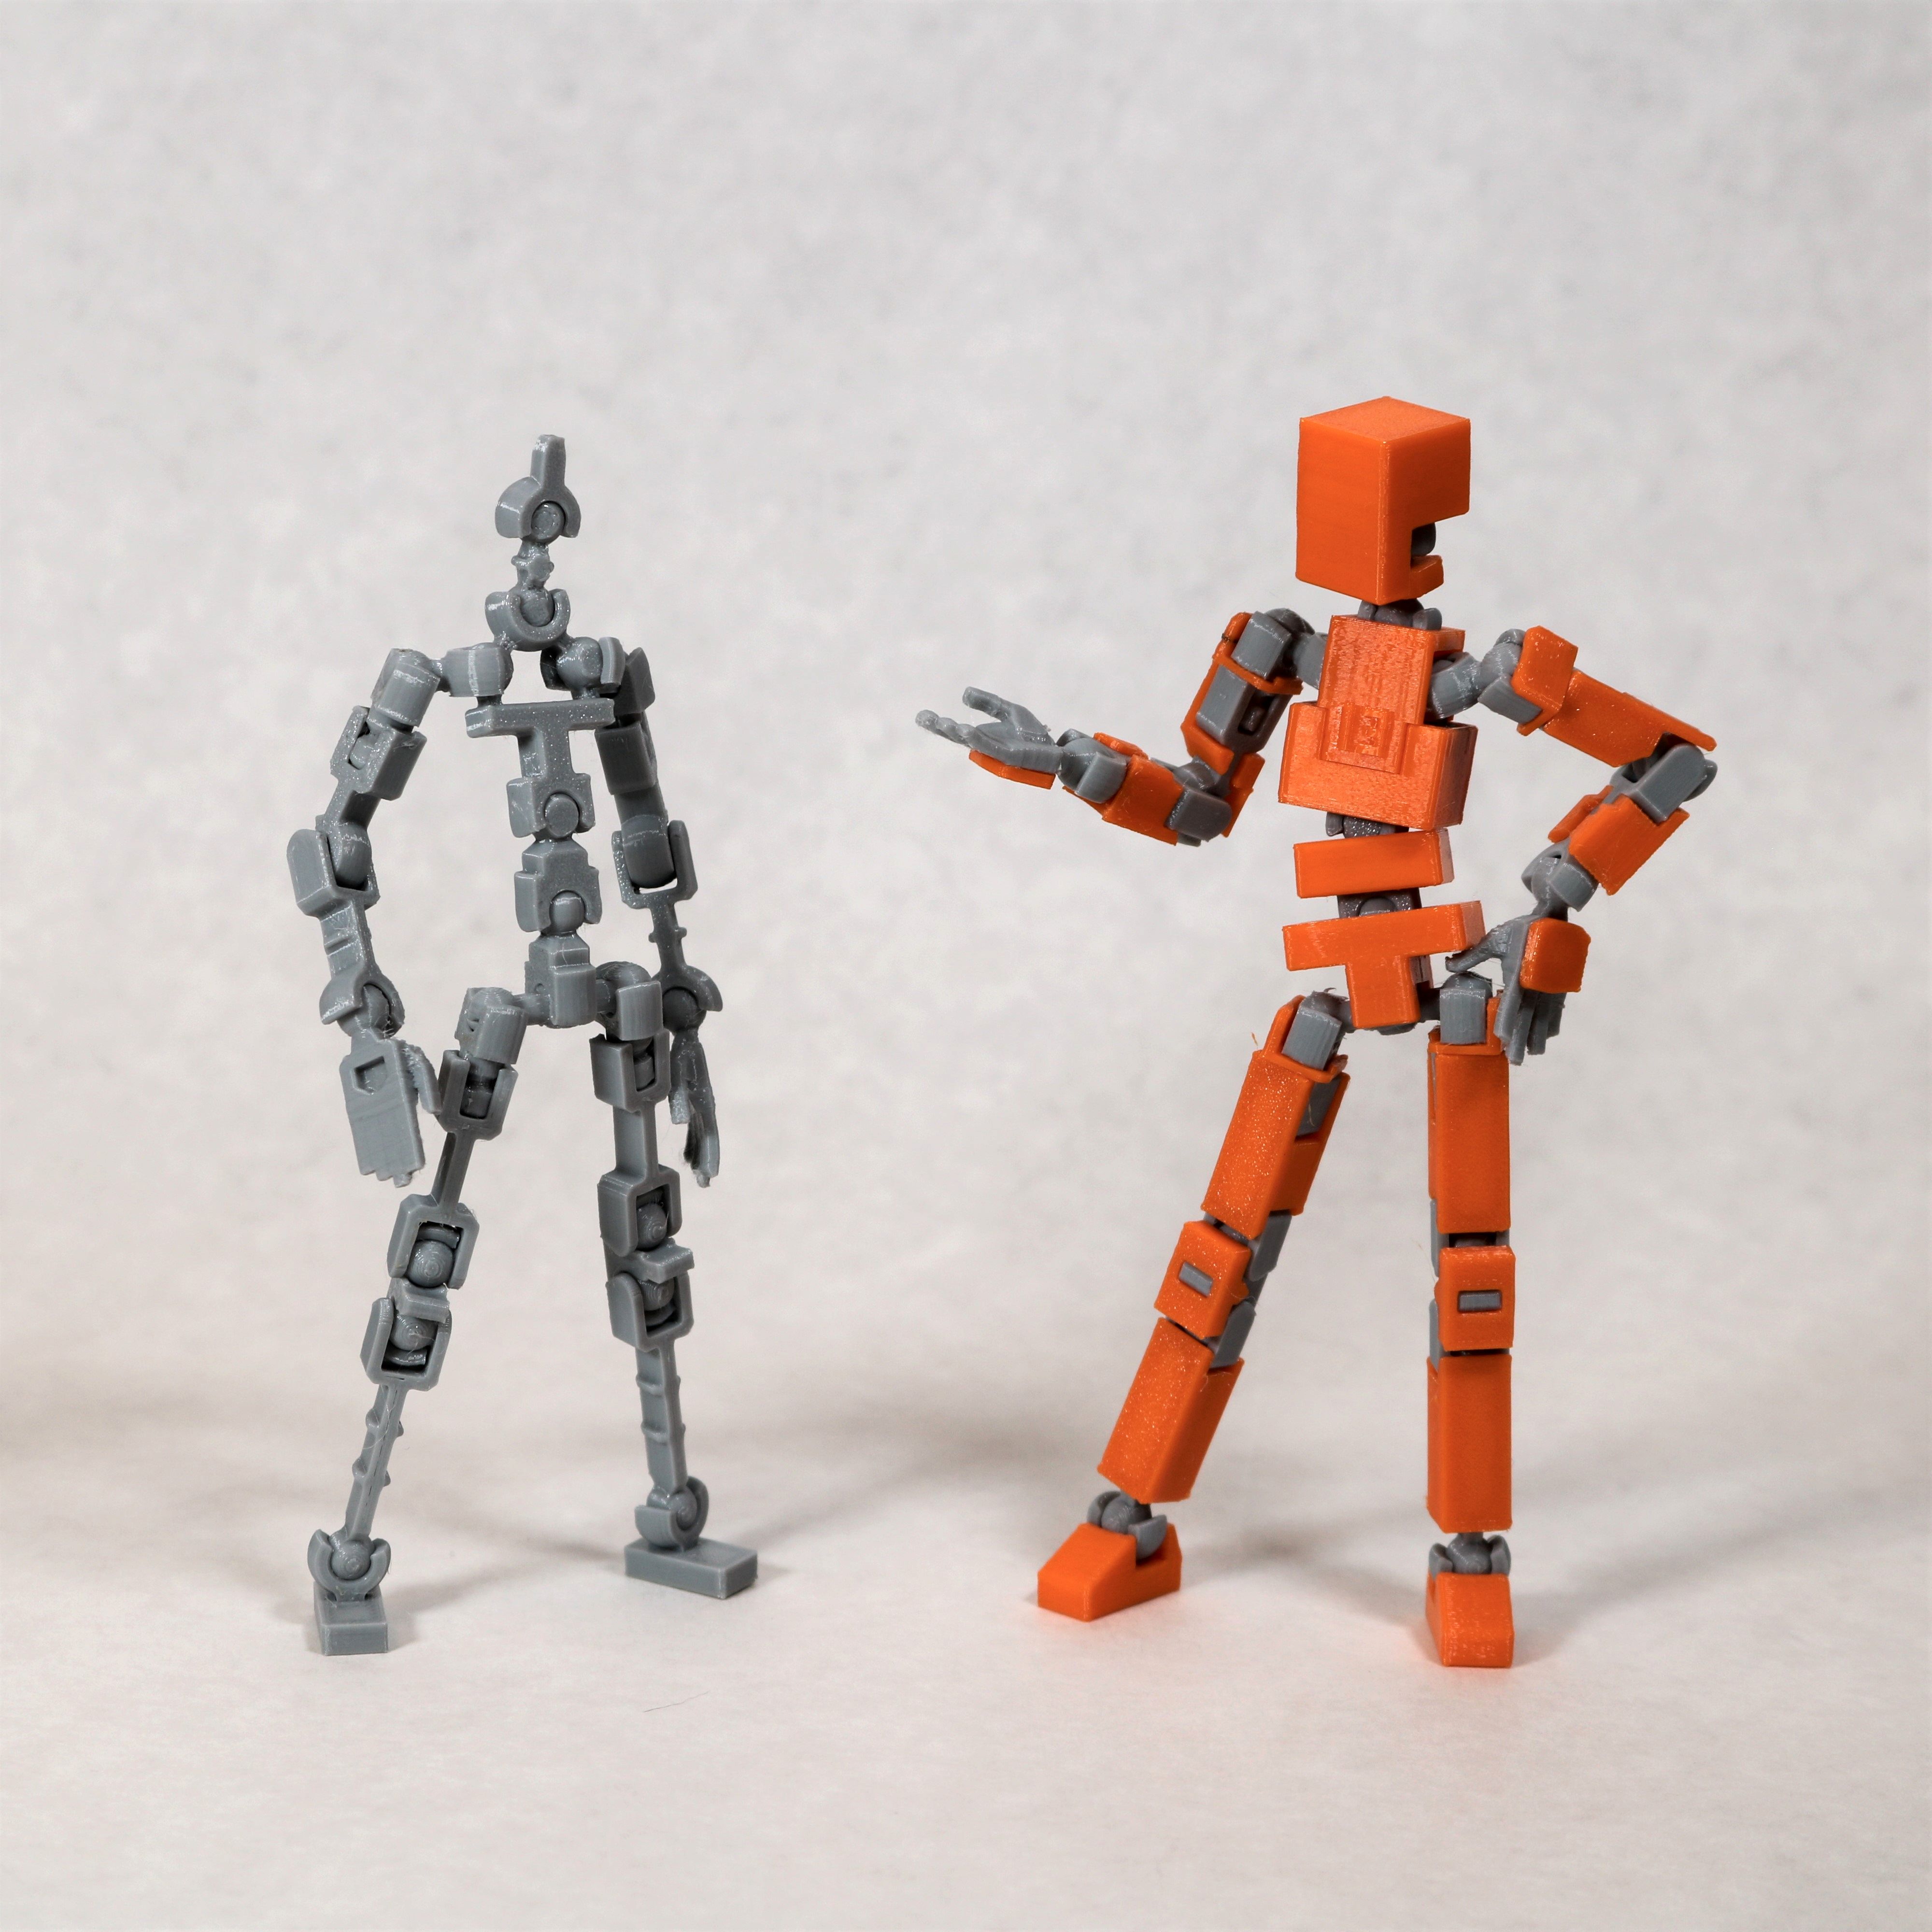 LUCKY 13 Printable Jointed Figure by soozafone | Download free STL ...